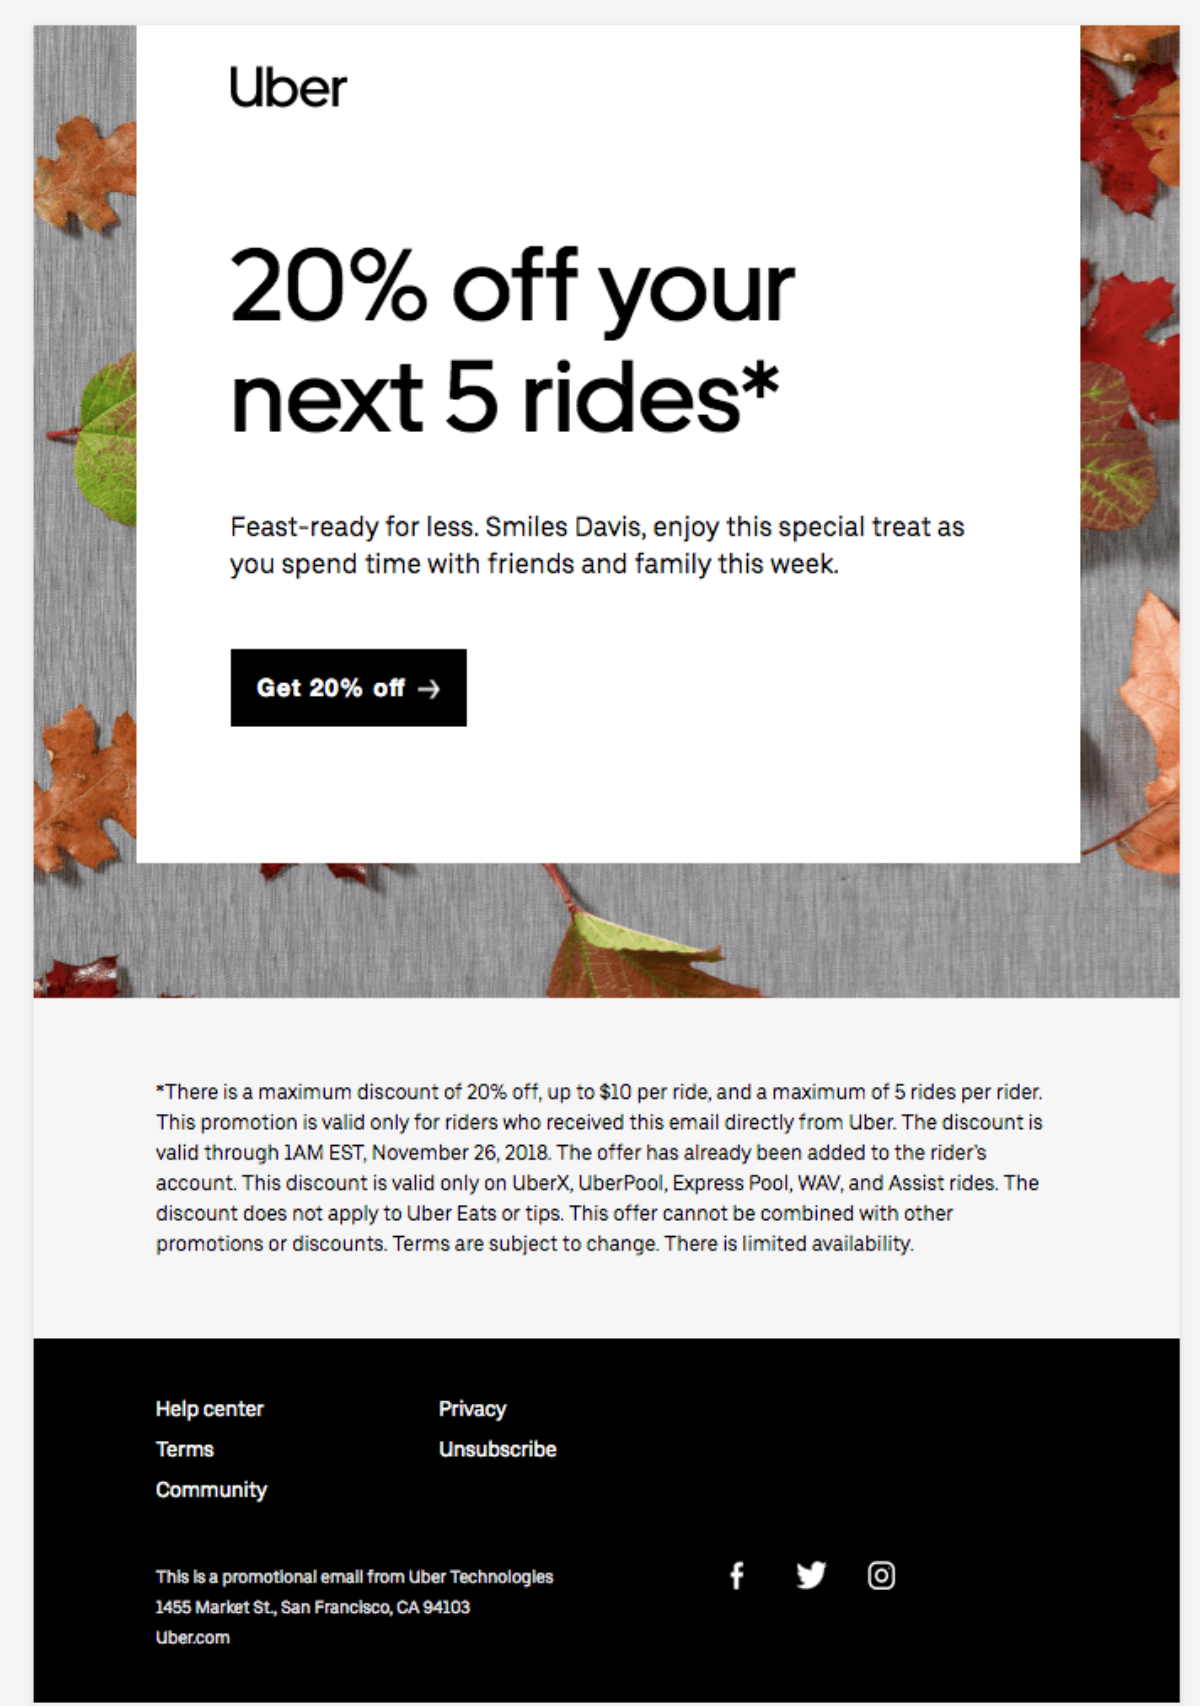 Uber email for loyal customers